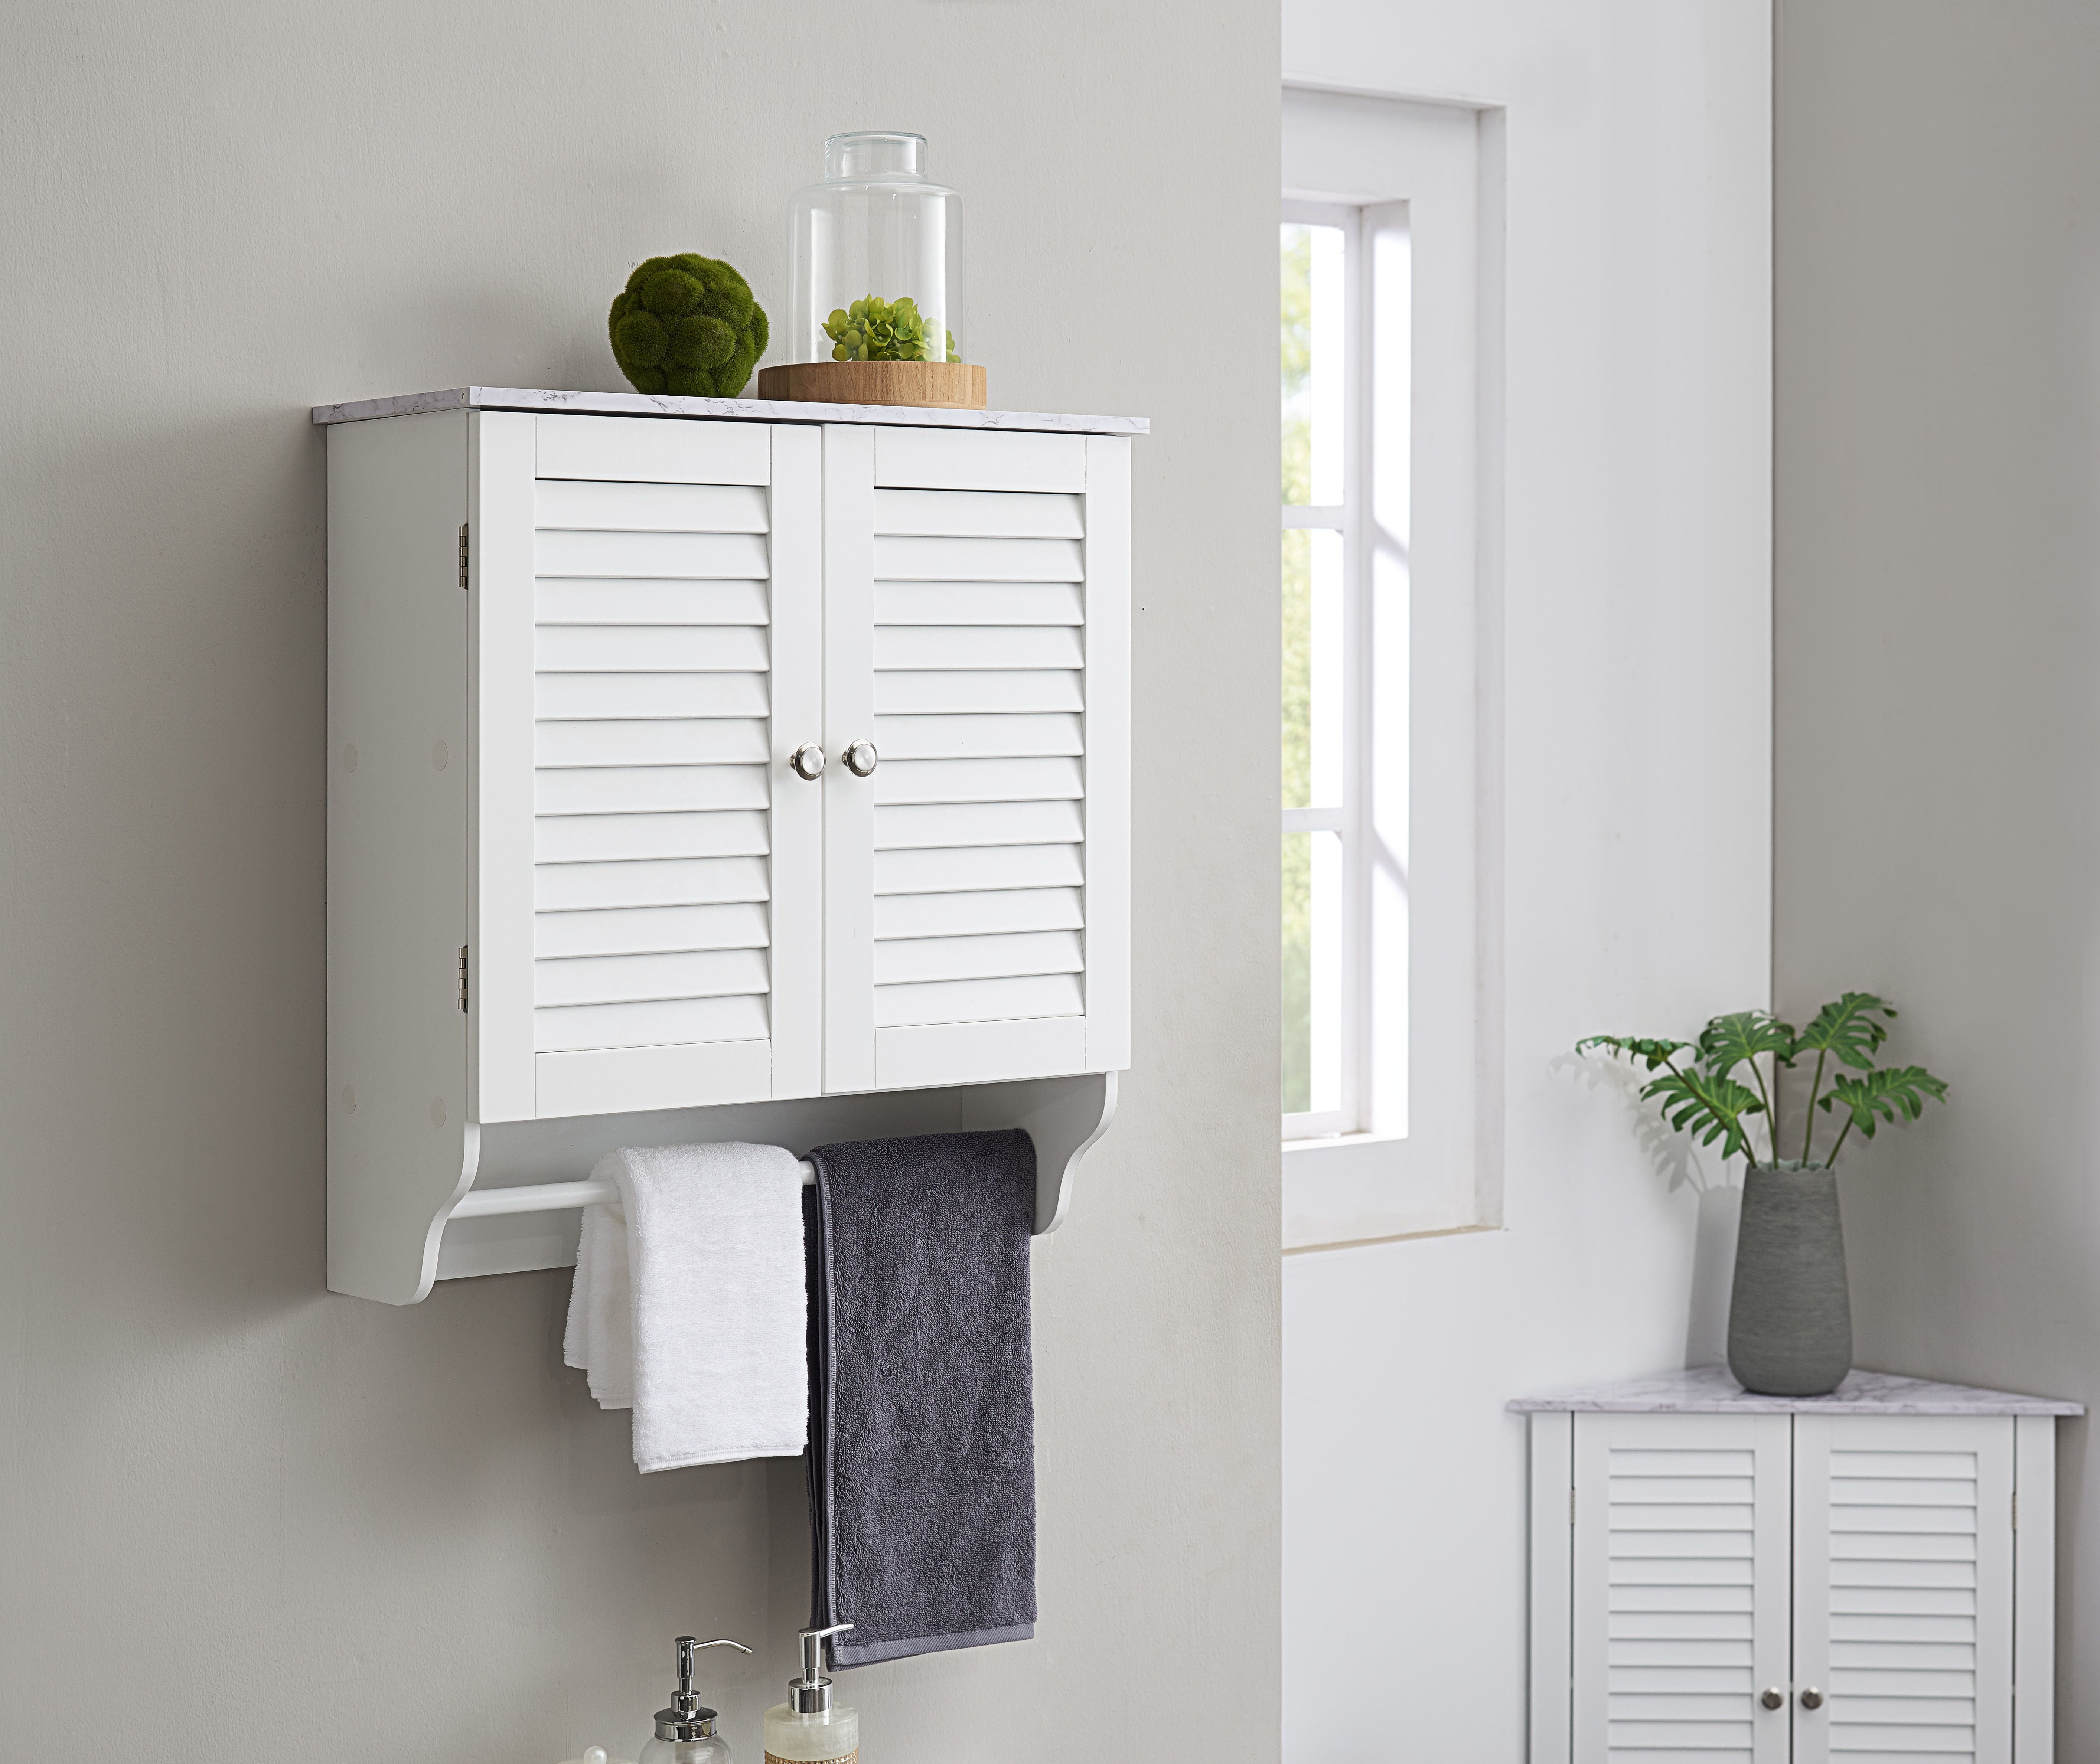 Trevita Wall Mounted Bathroom Storage Cabinet With Towel Rack White Marble Wood Com - White Wall Mounted Bathroom Cabinet With Towel Bar